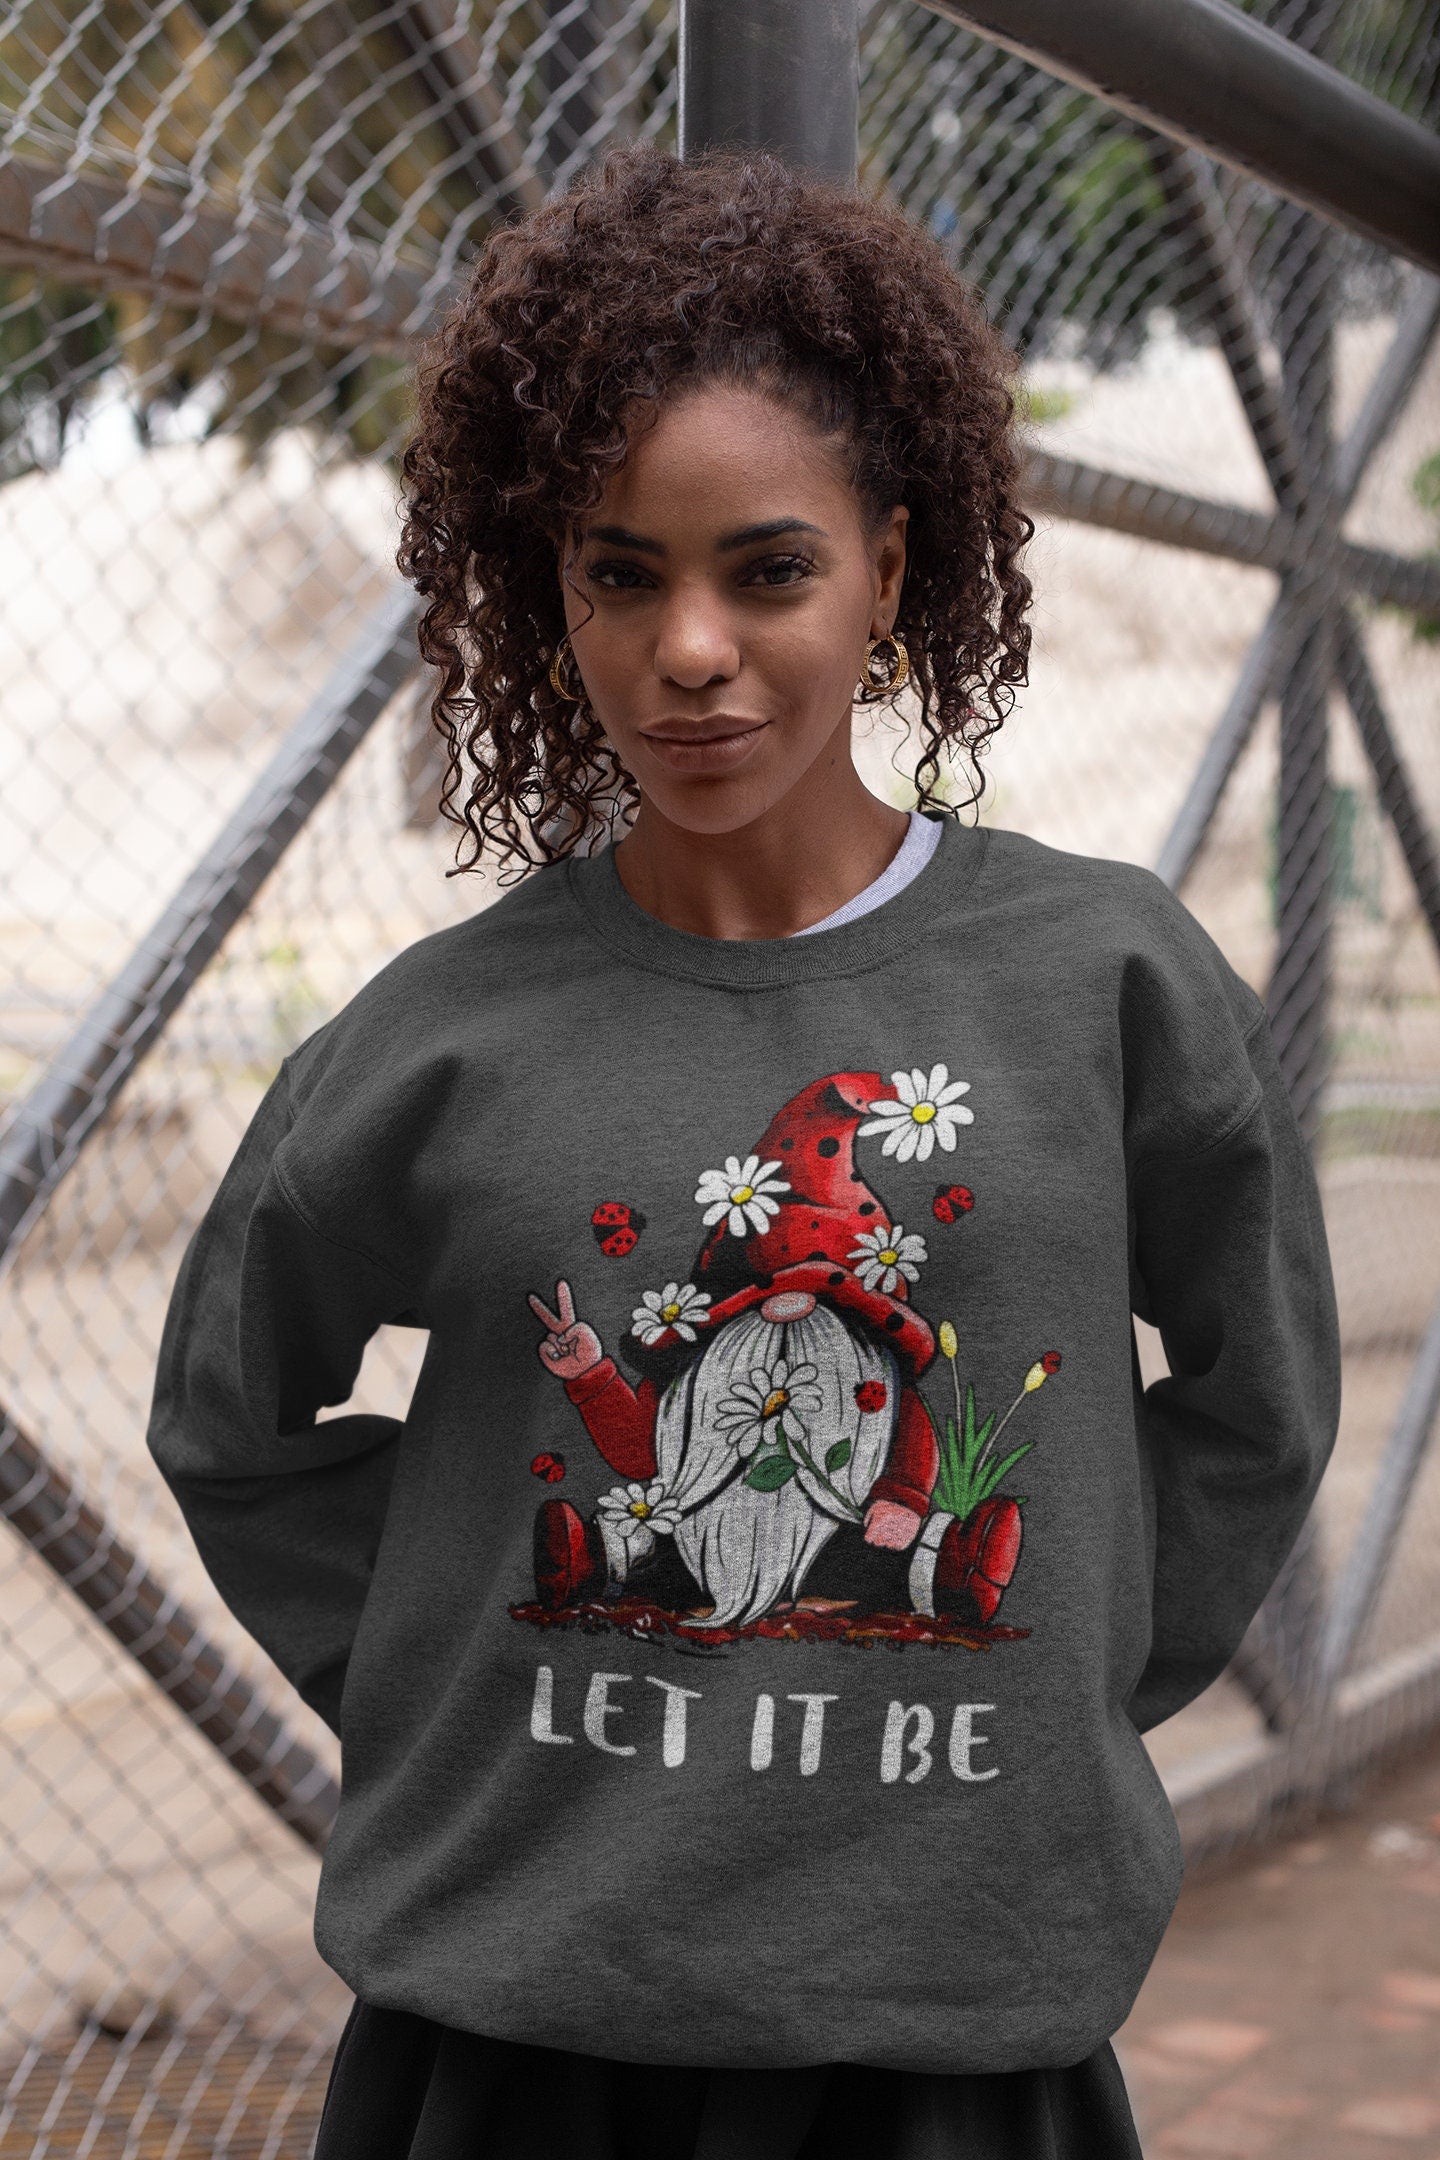 Let It Be Gnome Shirt, Daisy Flower Gnome Shirt, Cute Gnome Shirt, Funny Gnome Tee, Valentines Gift Shirt, Gift for Her